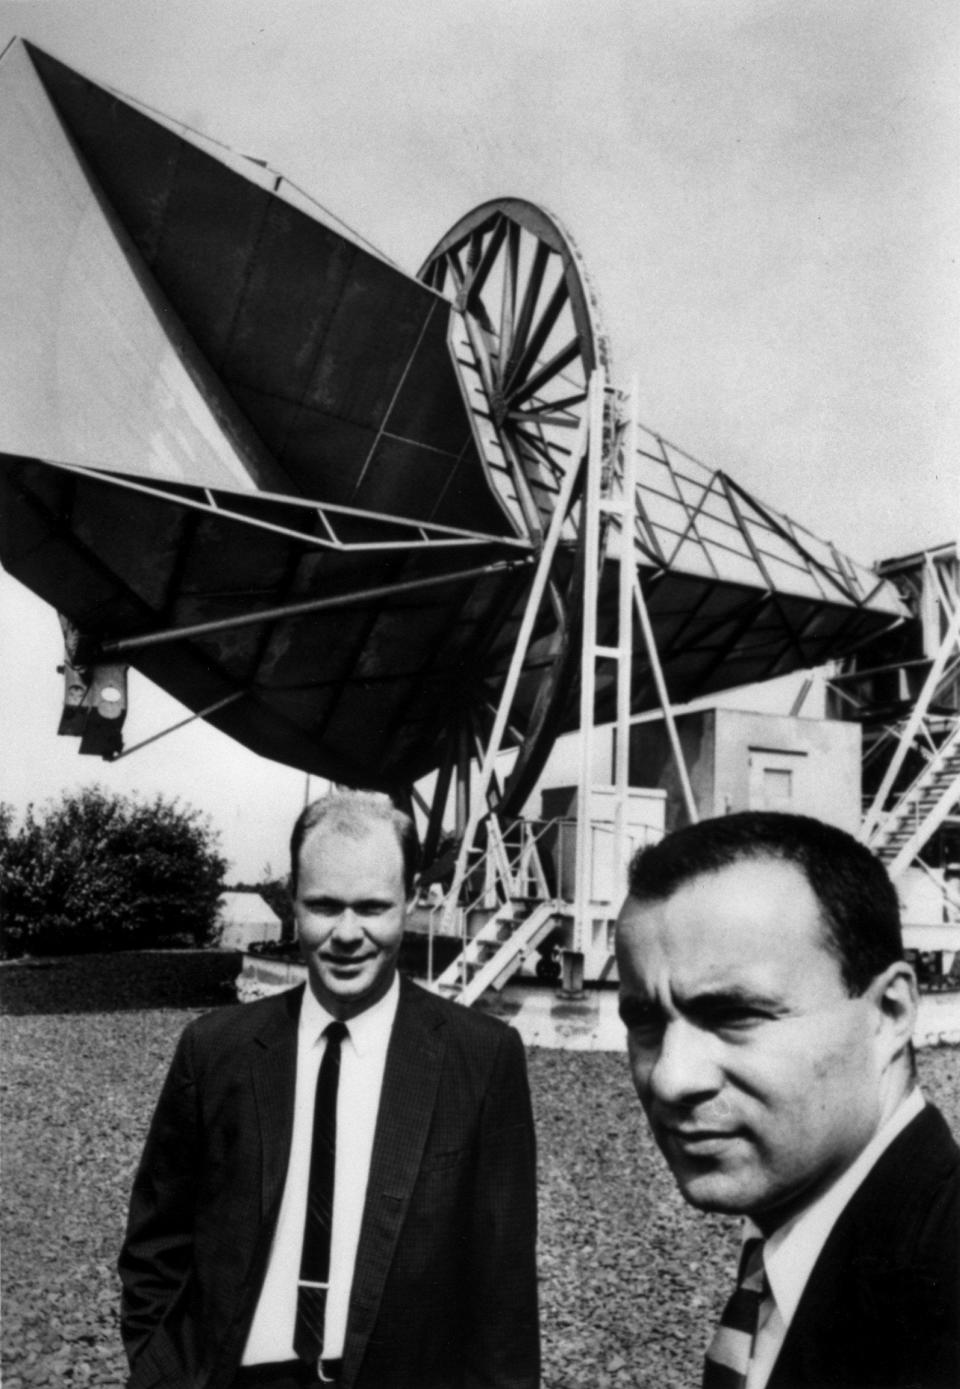 In this undated handout photo released by Alcatel Lucent, Bell Labs' Robert Wilson, left, and Arno Penzias, 1978 Nobel Prize winners for their discovery of the "Big Bang" theory of the universe's creation, are photographed in front of the famous Horn Antenna in Holmdel, NJ From the ubiquitous technology made possible by Bell Labs' invention of the transistor and laser to its scientists helping prove how the universe began, the lab has greatly influenced technology and culture. (AP Photo/Alcatel Lucent)